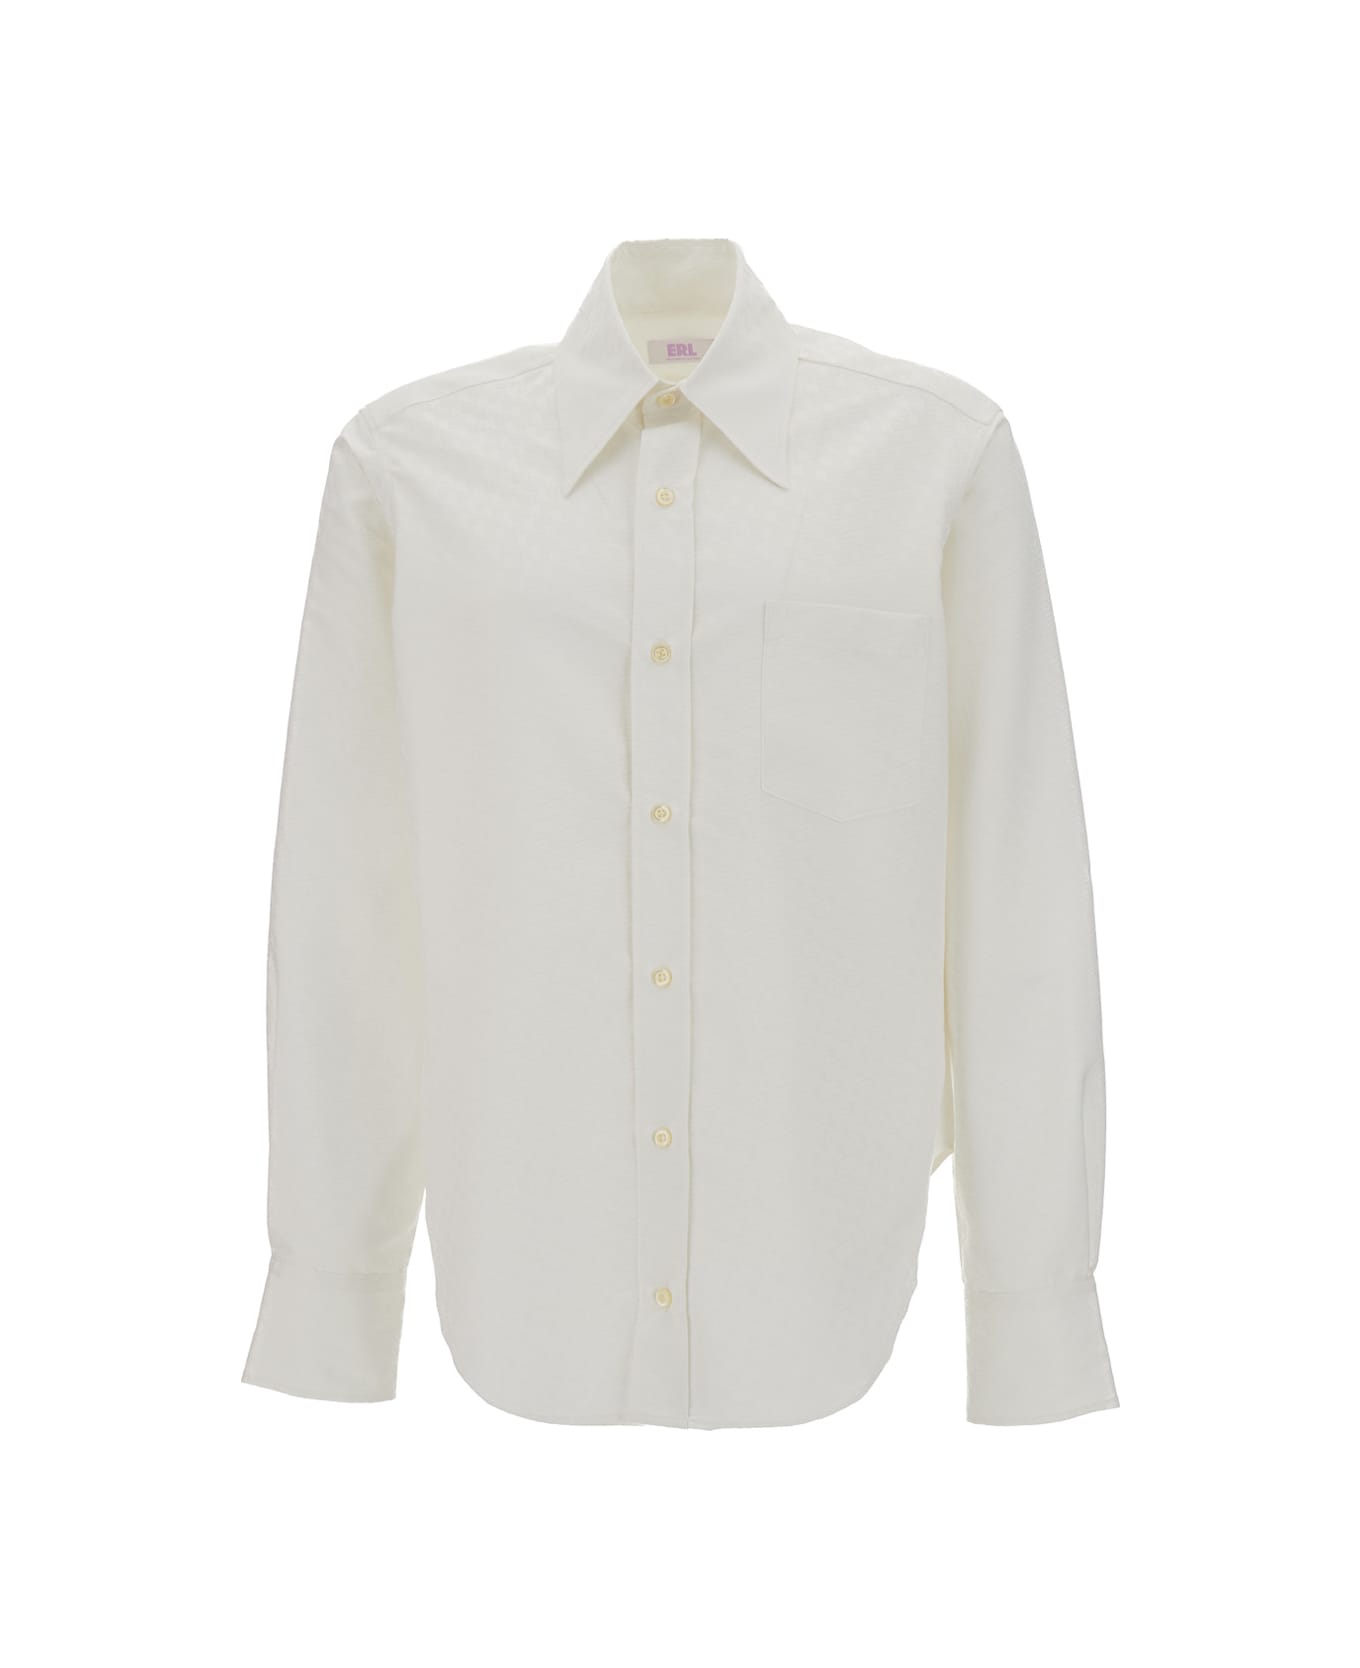 ERL White Buttoned Up Oversize Shirt In Polyester Unisex - White